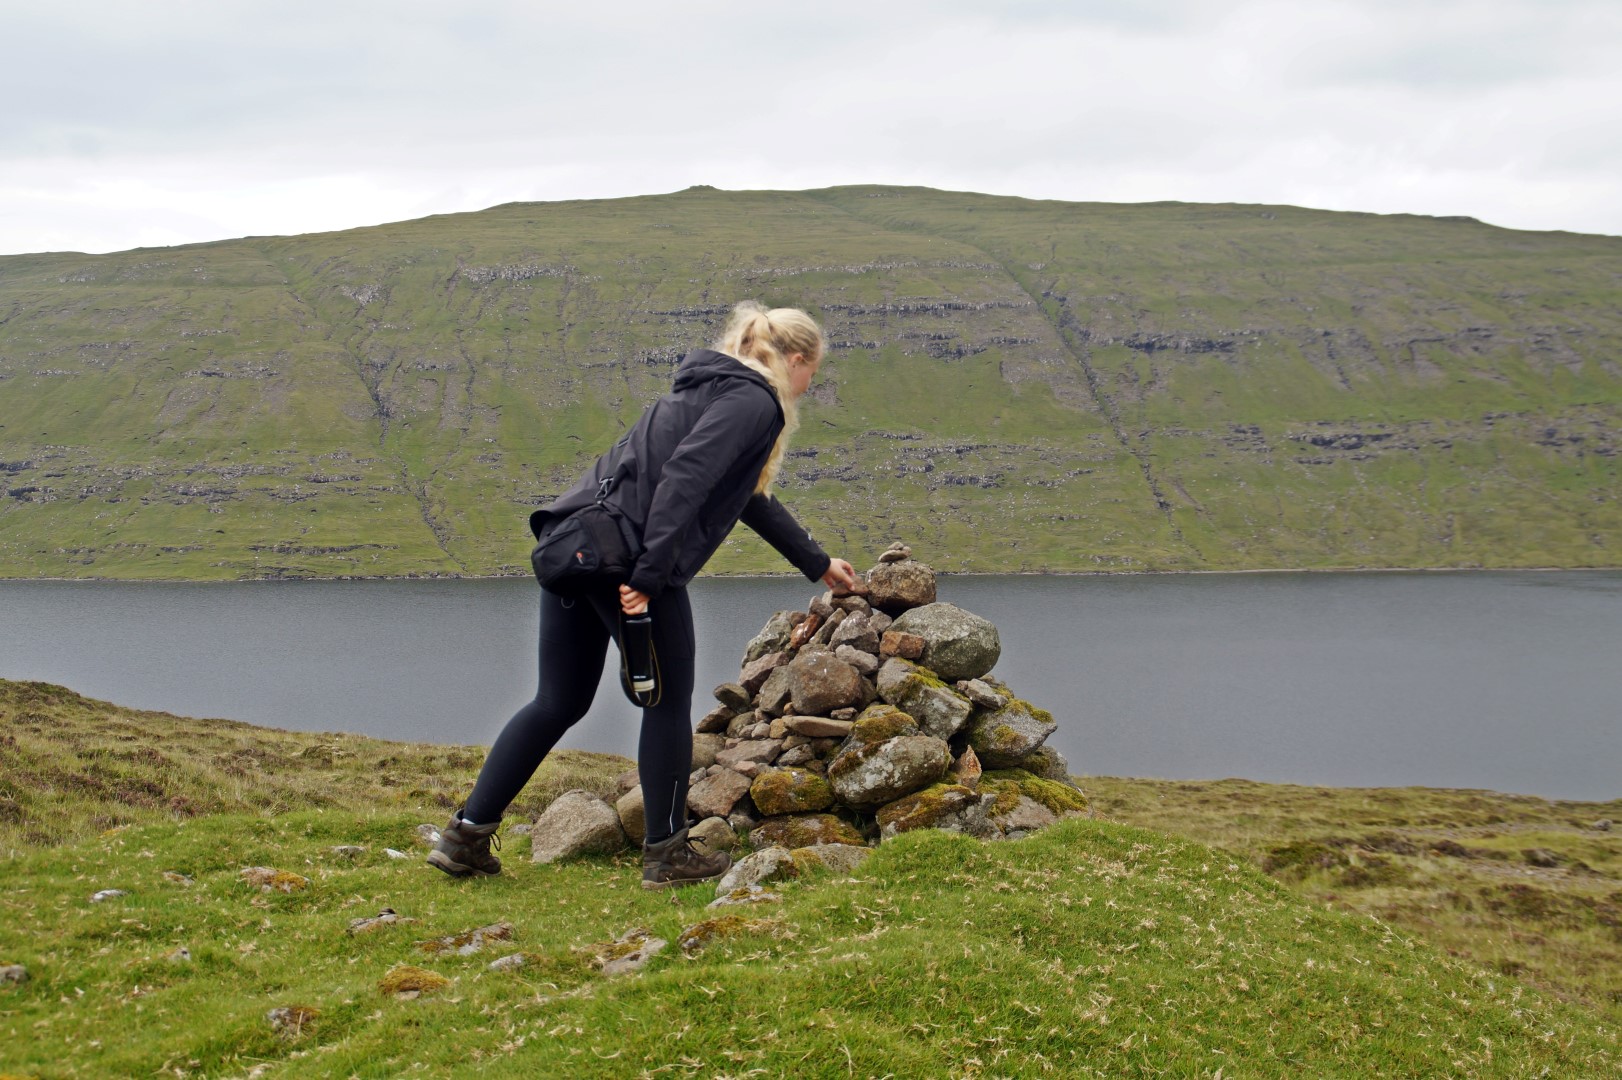 Katrine following Faroese tradition by putting a stone on the cairn as we walk by